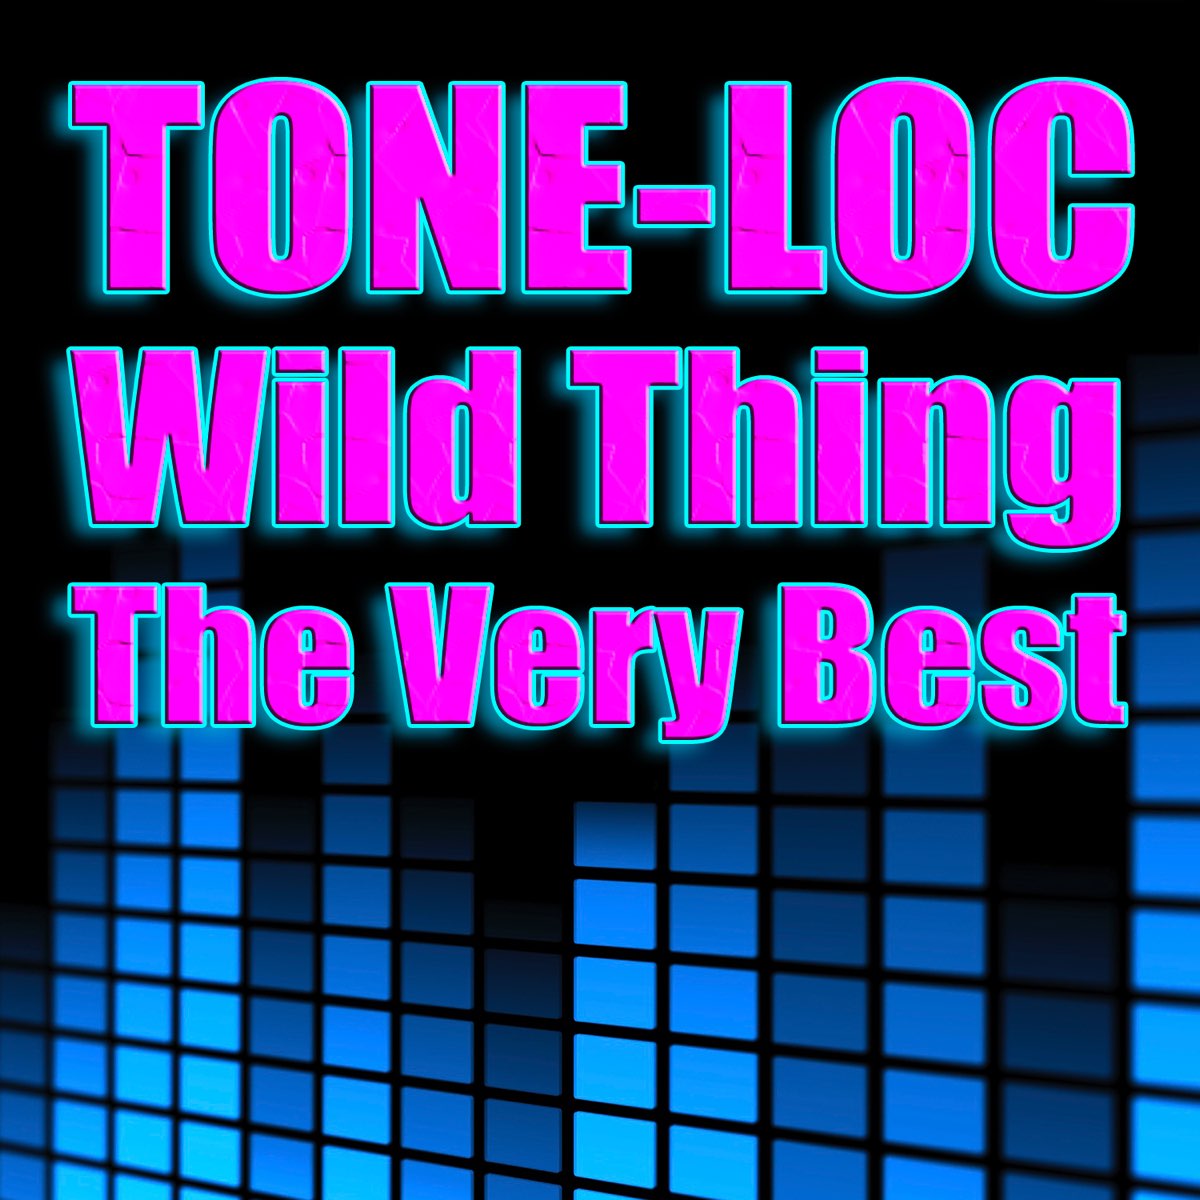 Wild Thing - The Very Best (Re-Recorded / Remastered Versions) by Tone-Loc  on Apple Music